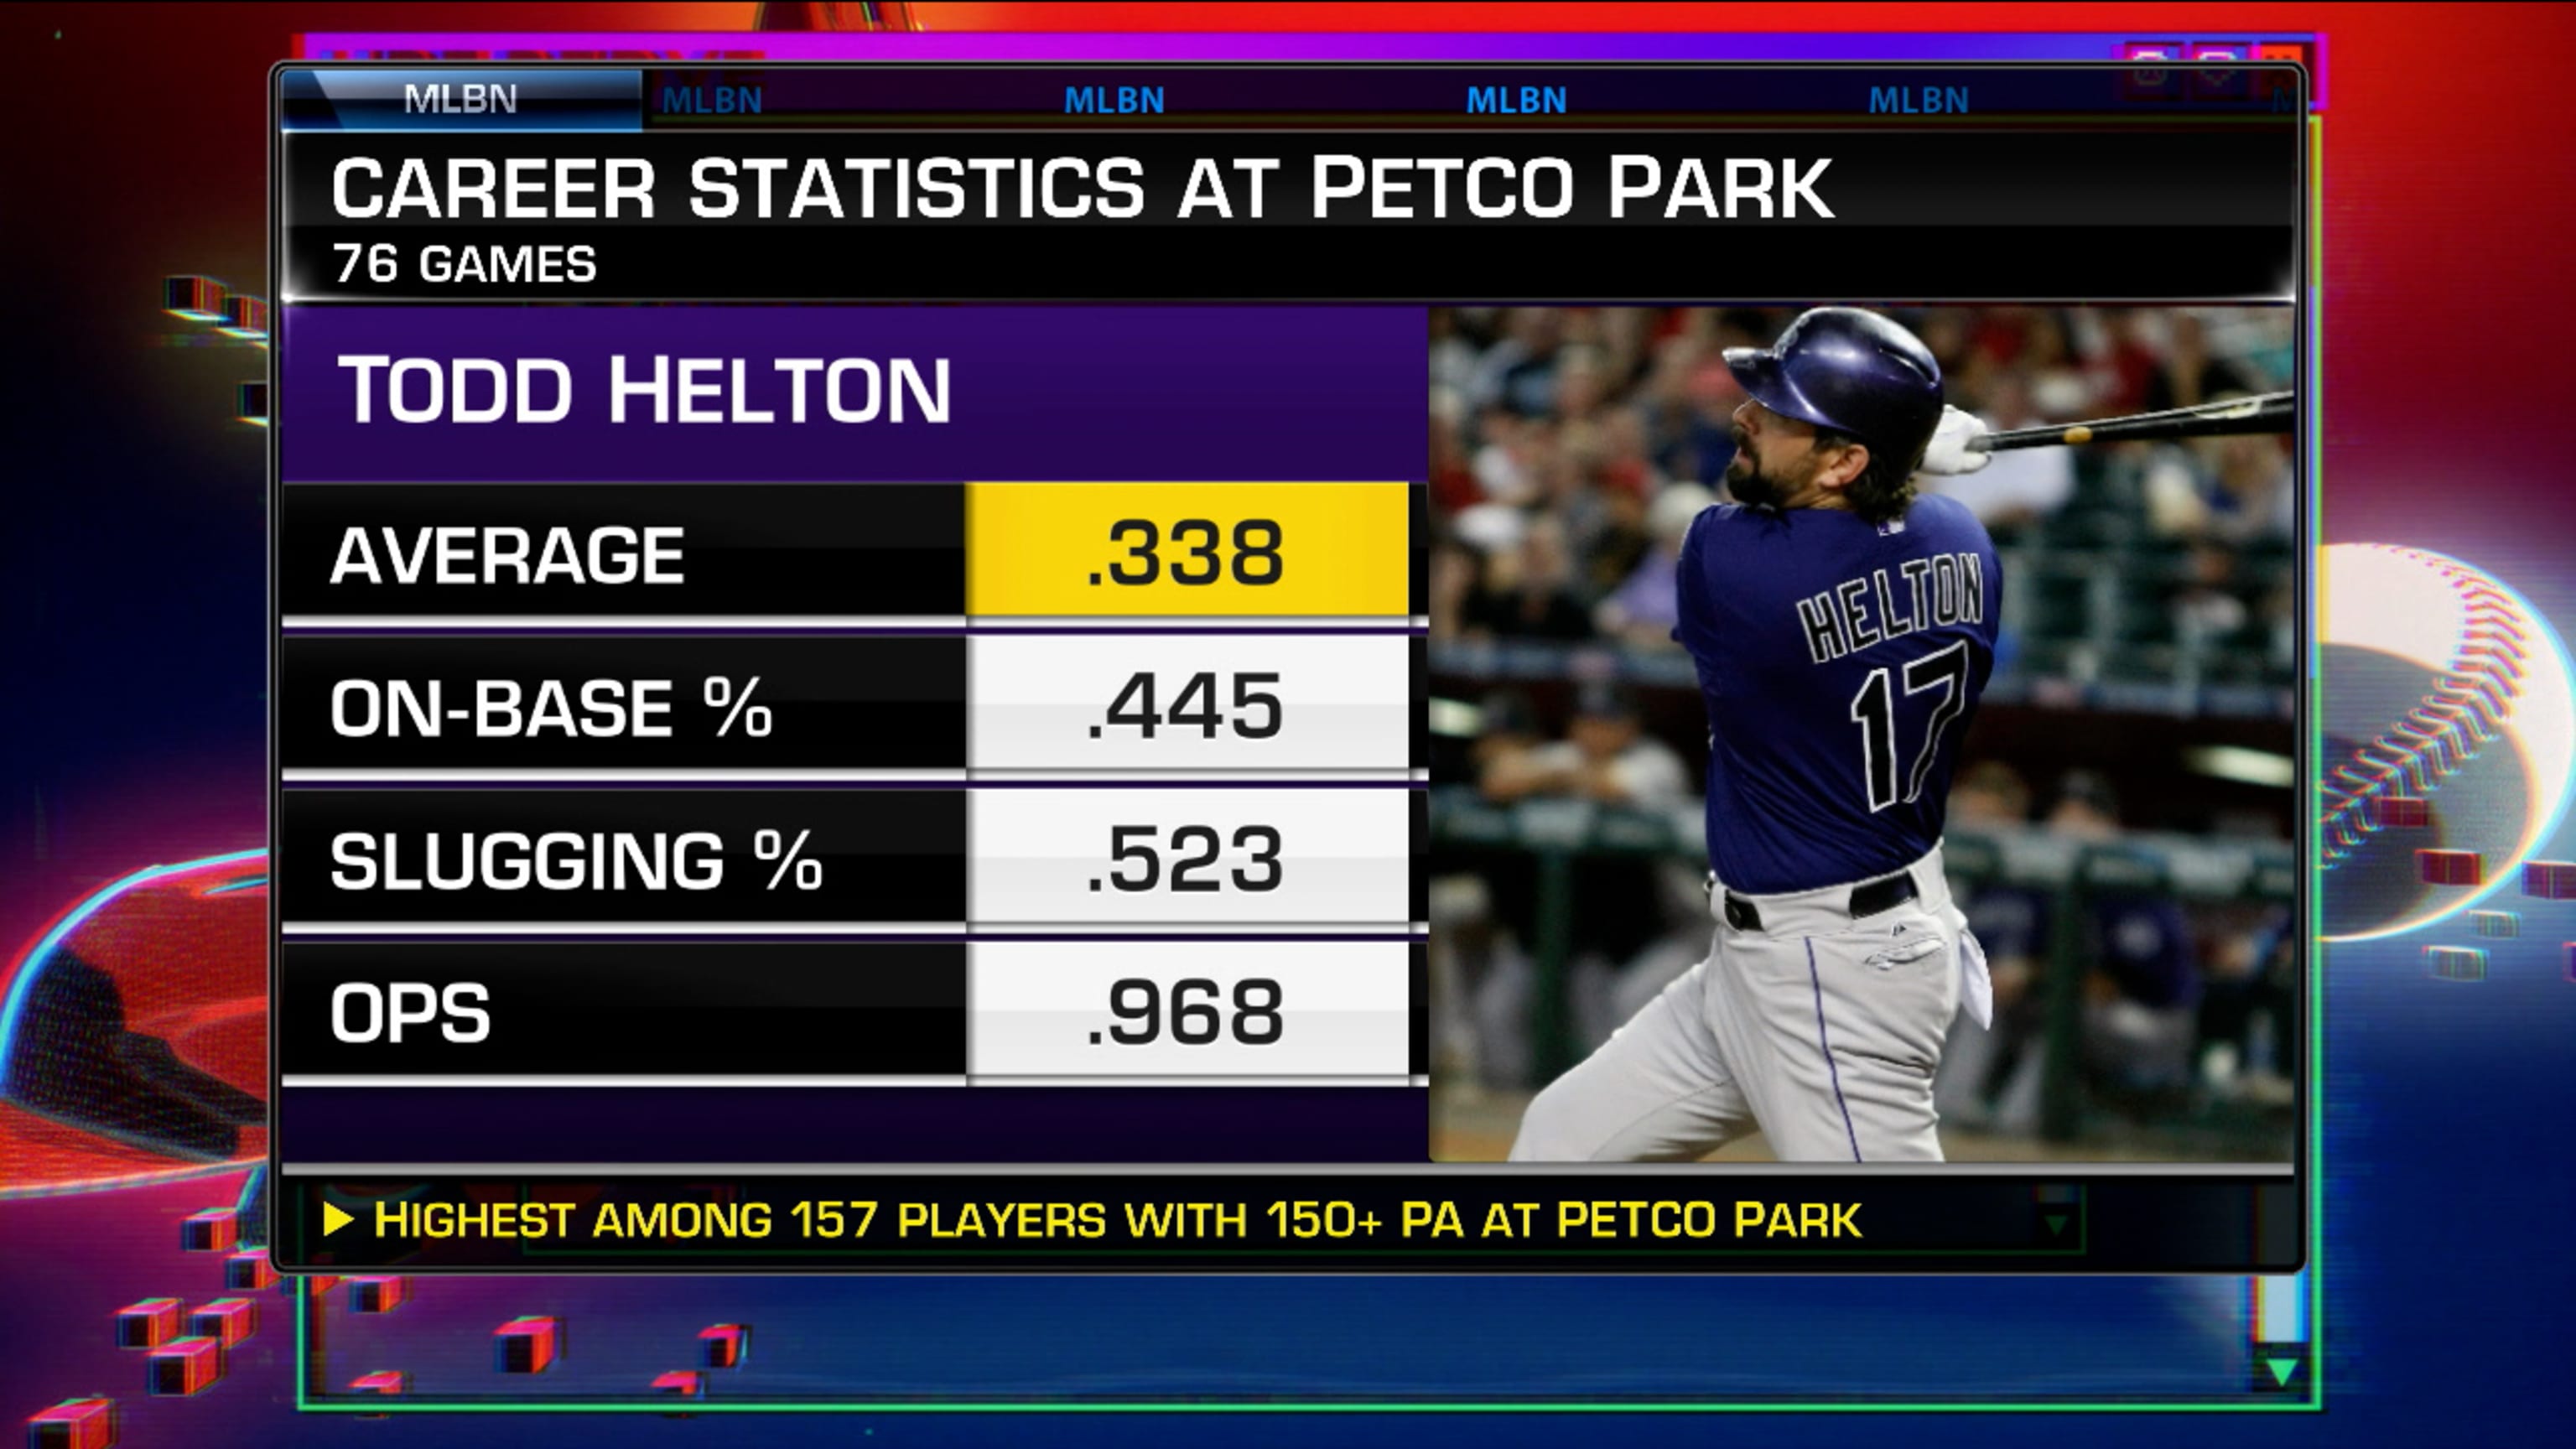 Todd Helton's HOF candidacy